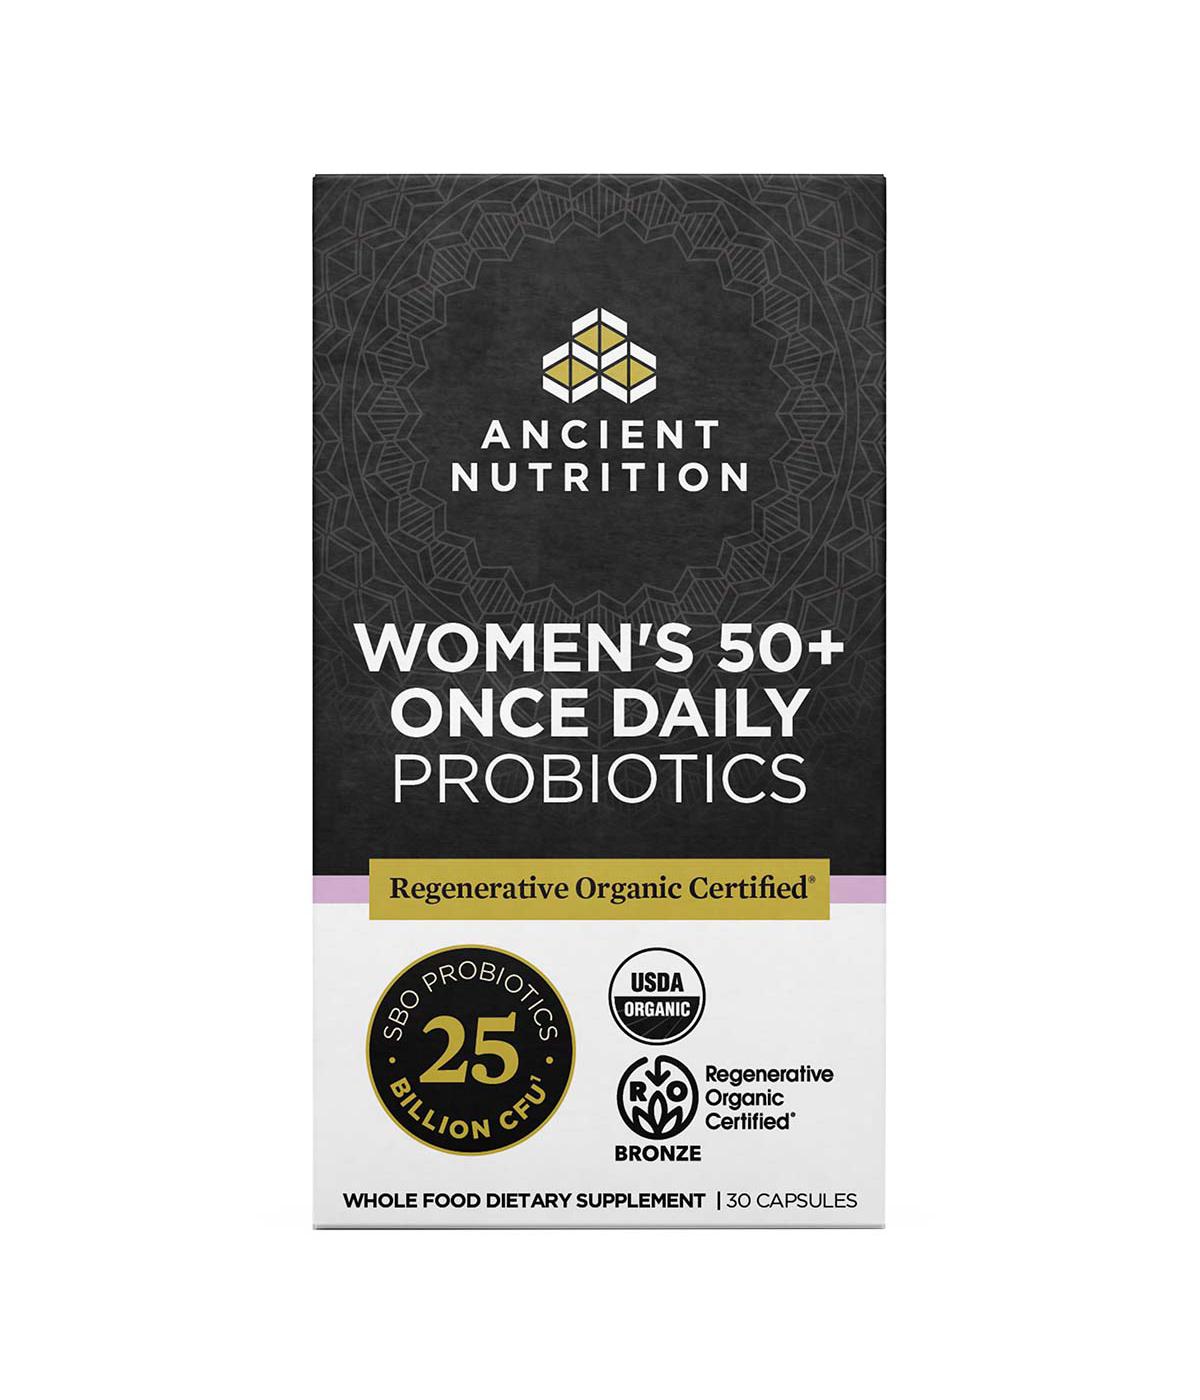 Ancient Nutrition Women's 50+ Once Daily Probiotics Capsules; image 1 of 4